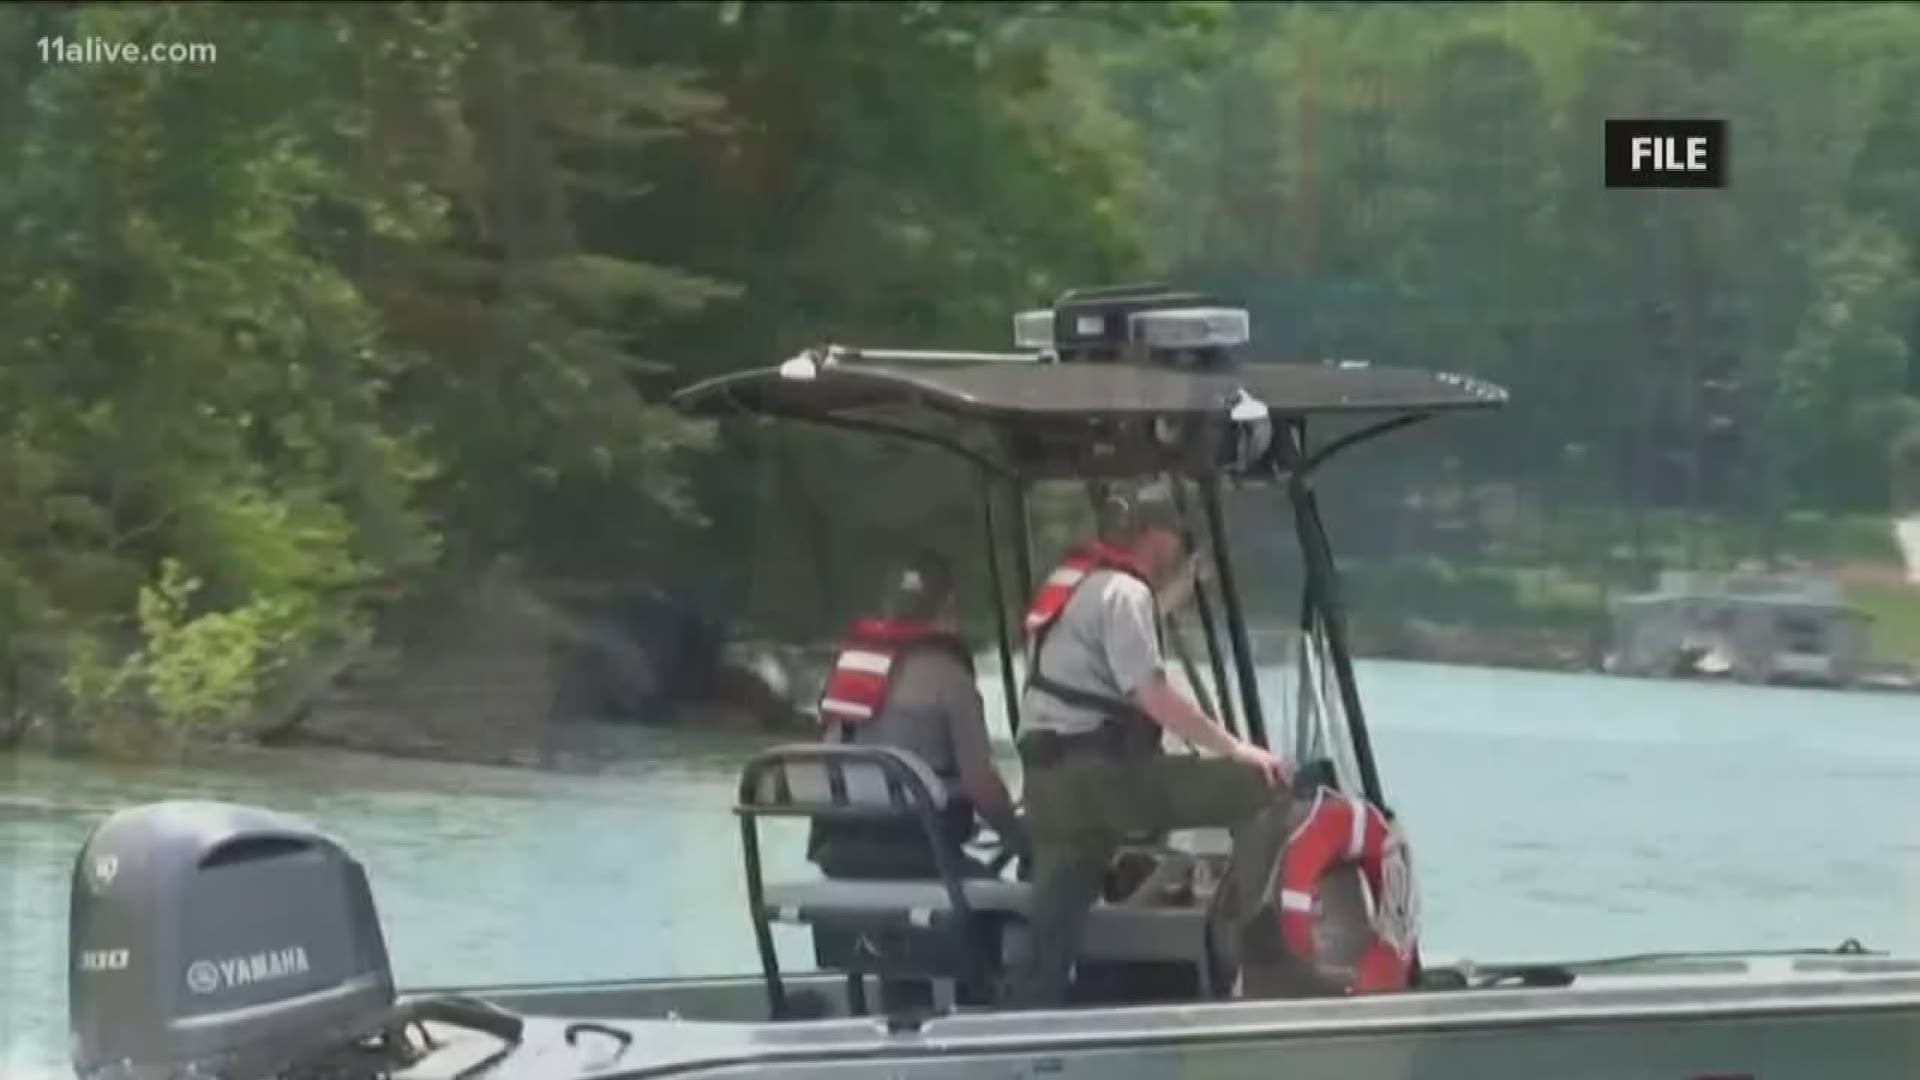 The Georgia Department of Natural Resources says there are simple things people can do to be safe out on the water, not just this weekend, but through the entire summer.